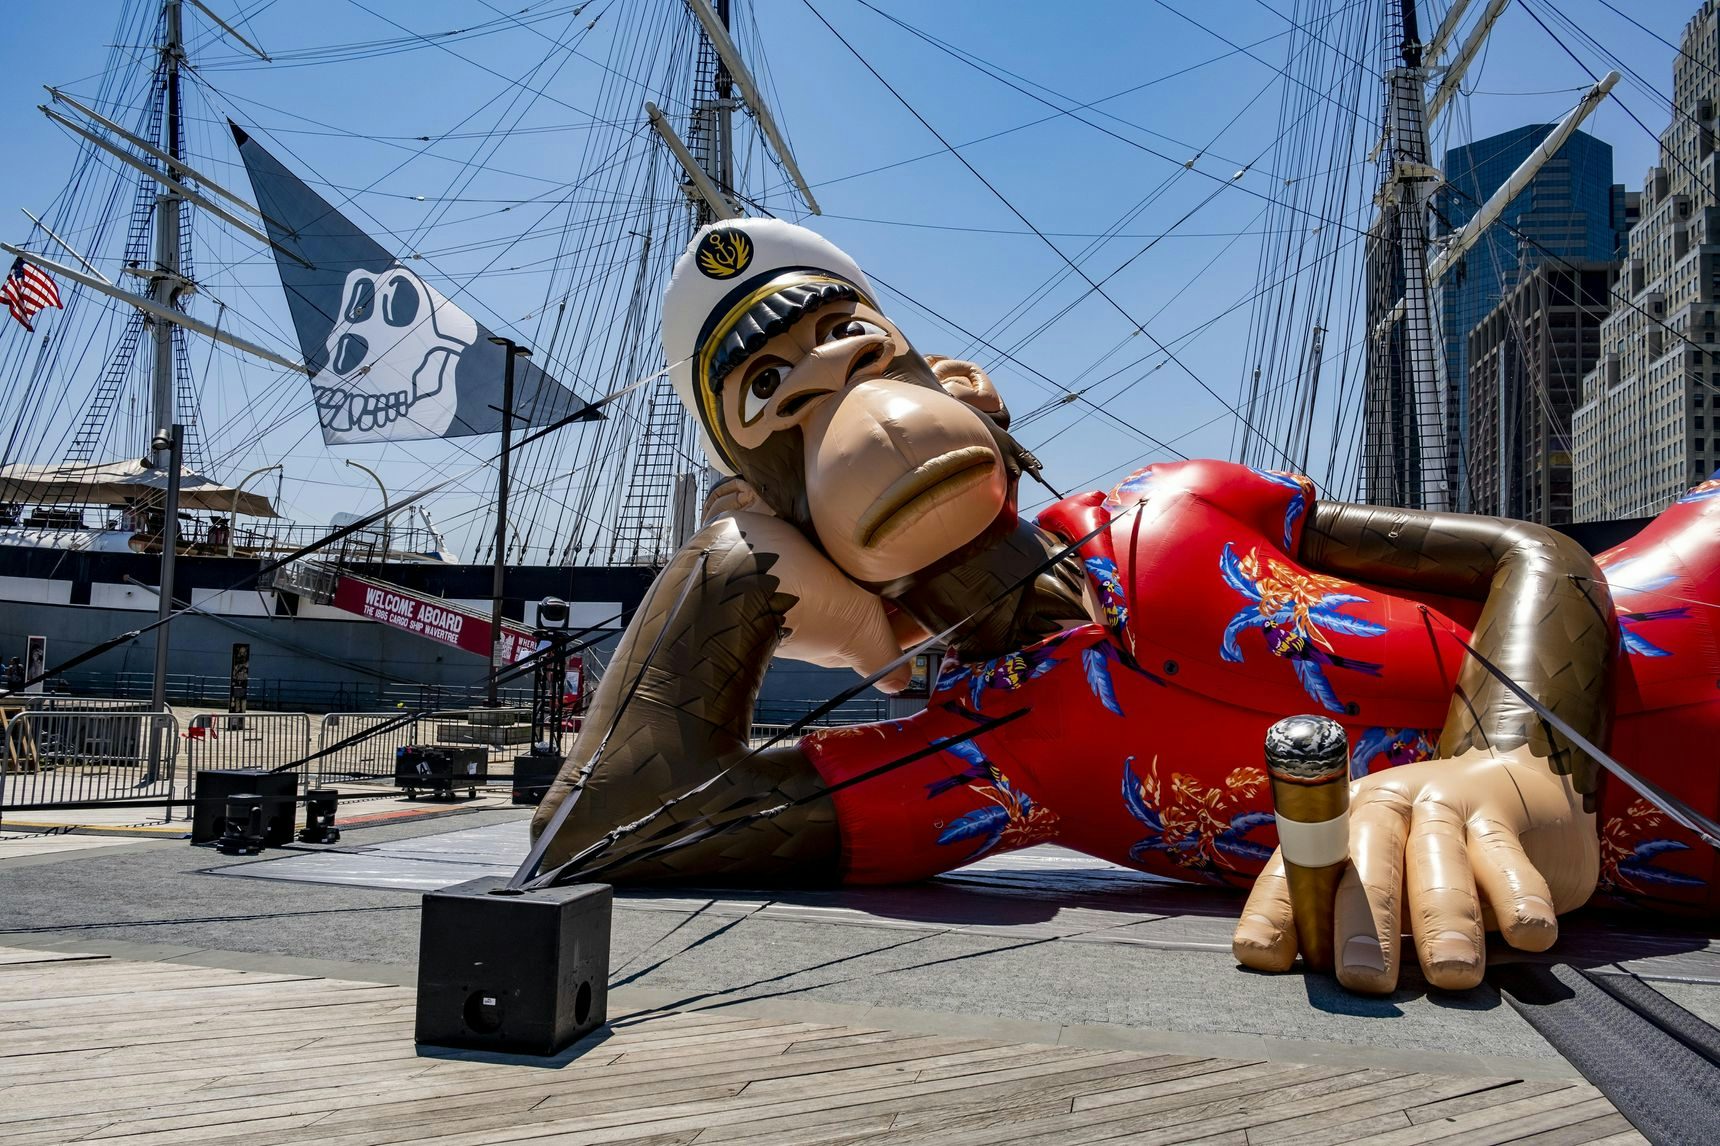 Splashy partnerships and hype installations, such as this Bored Apes inflatable as part of NFT NYC week are a popular tactic to drive brand awareness among web3 communities. (via: https://www.wsj.com/articles/marketers-at-nft-nyc-upbeat-on-brand-building-in-the-metaverse-11656324000)